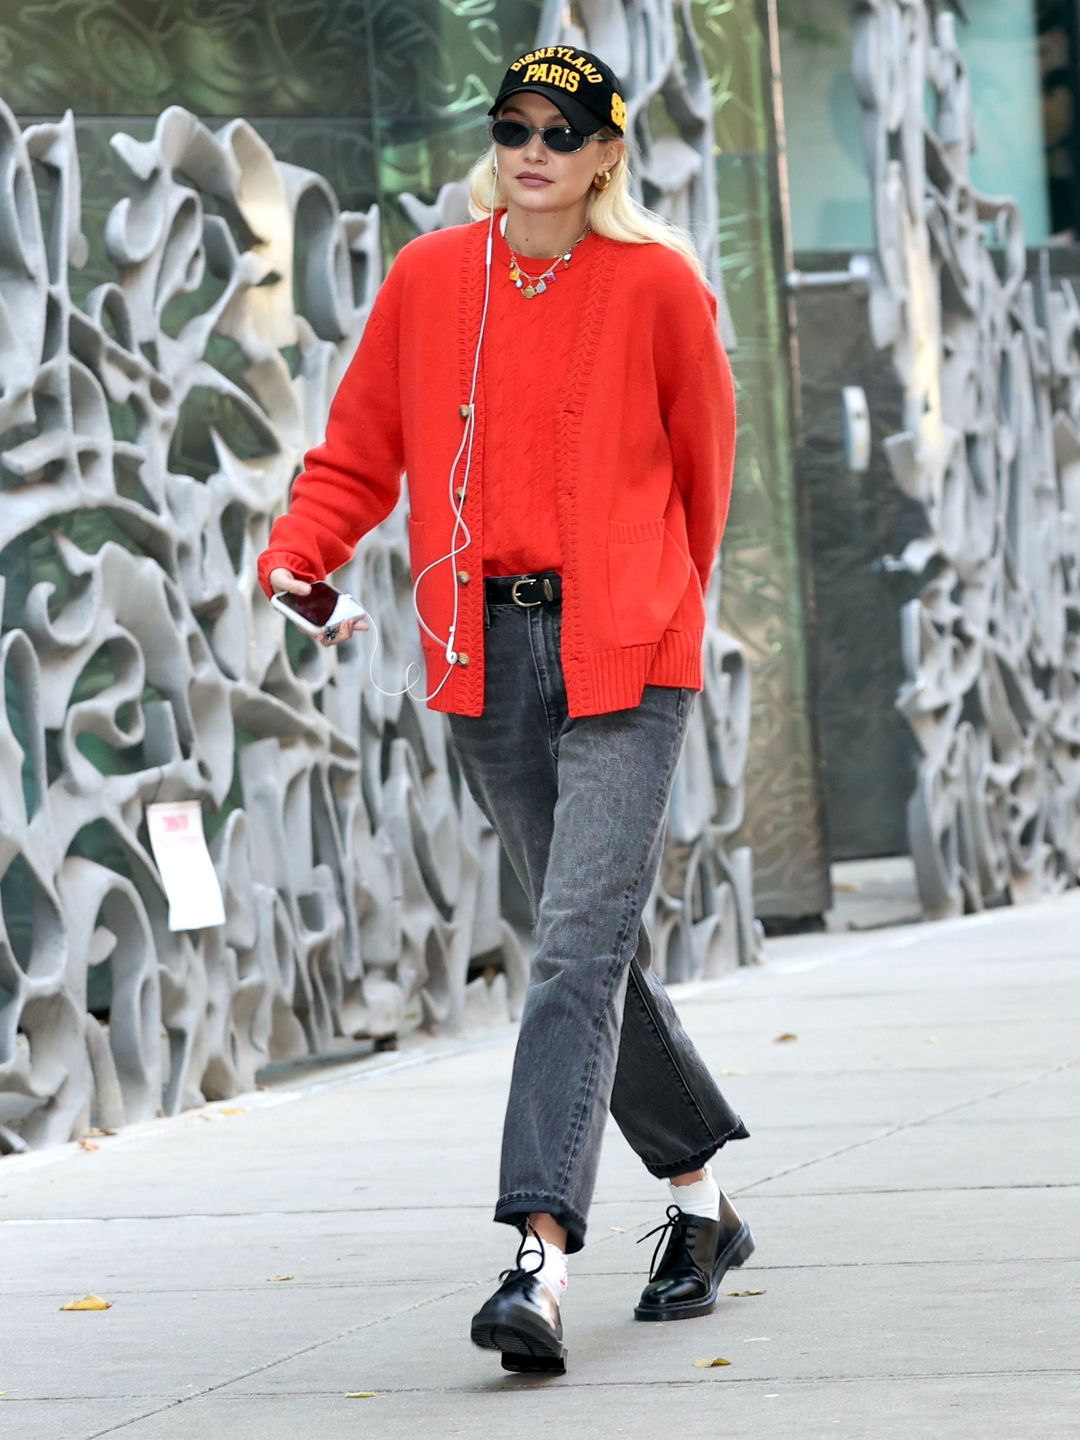 Gigi Hadid takes a walk in NYC wearing a red cardigan and jumper and black jeans 